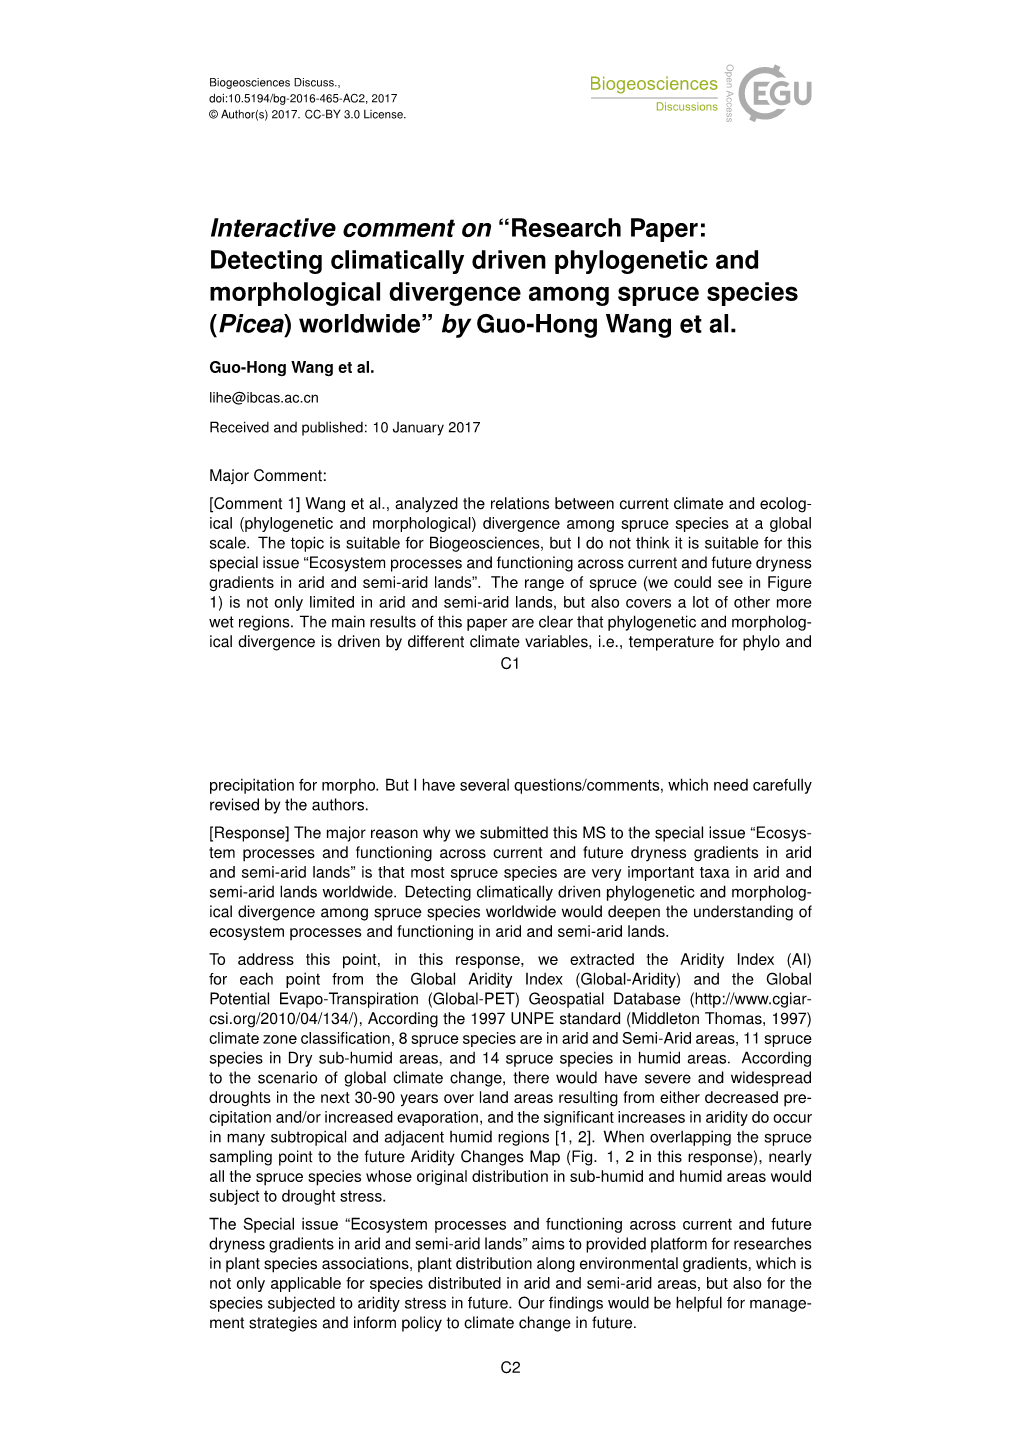 Research Paper: Detecting Climatically Driven Phylogenetic and Morphological Divergence Among Spruce Species (Picea) Worldwide” by Guo-Hong Wang Et Al